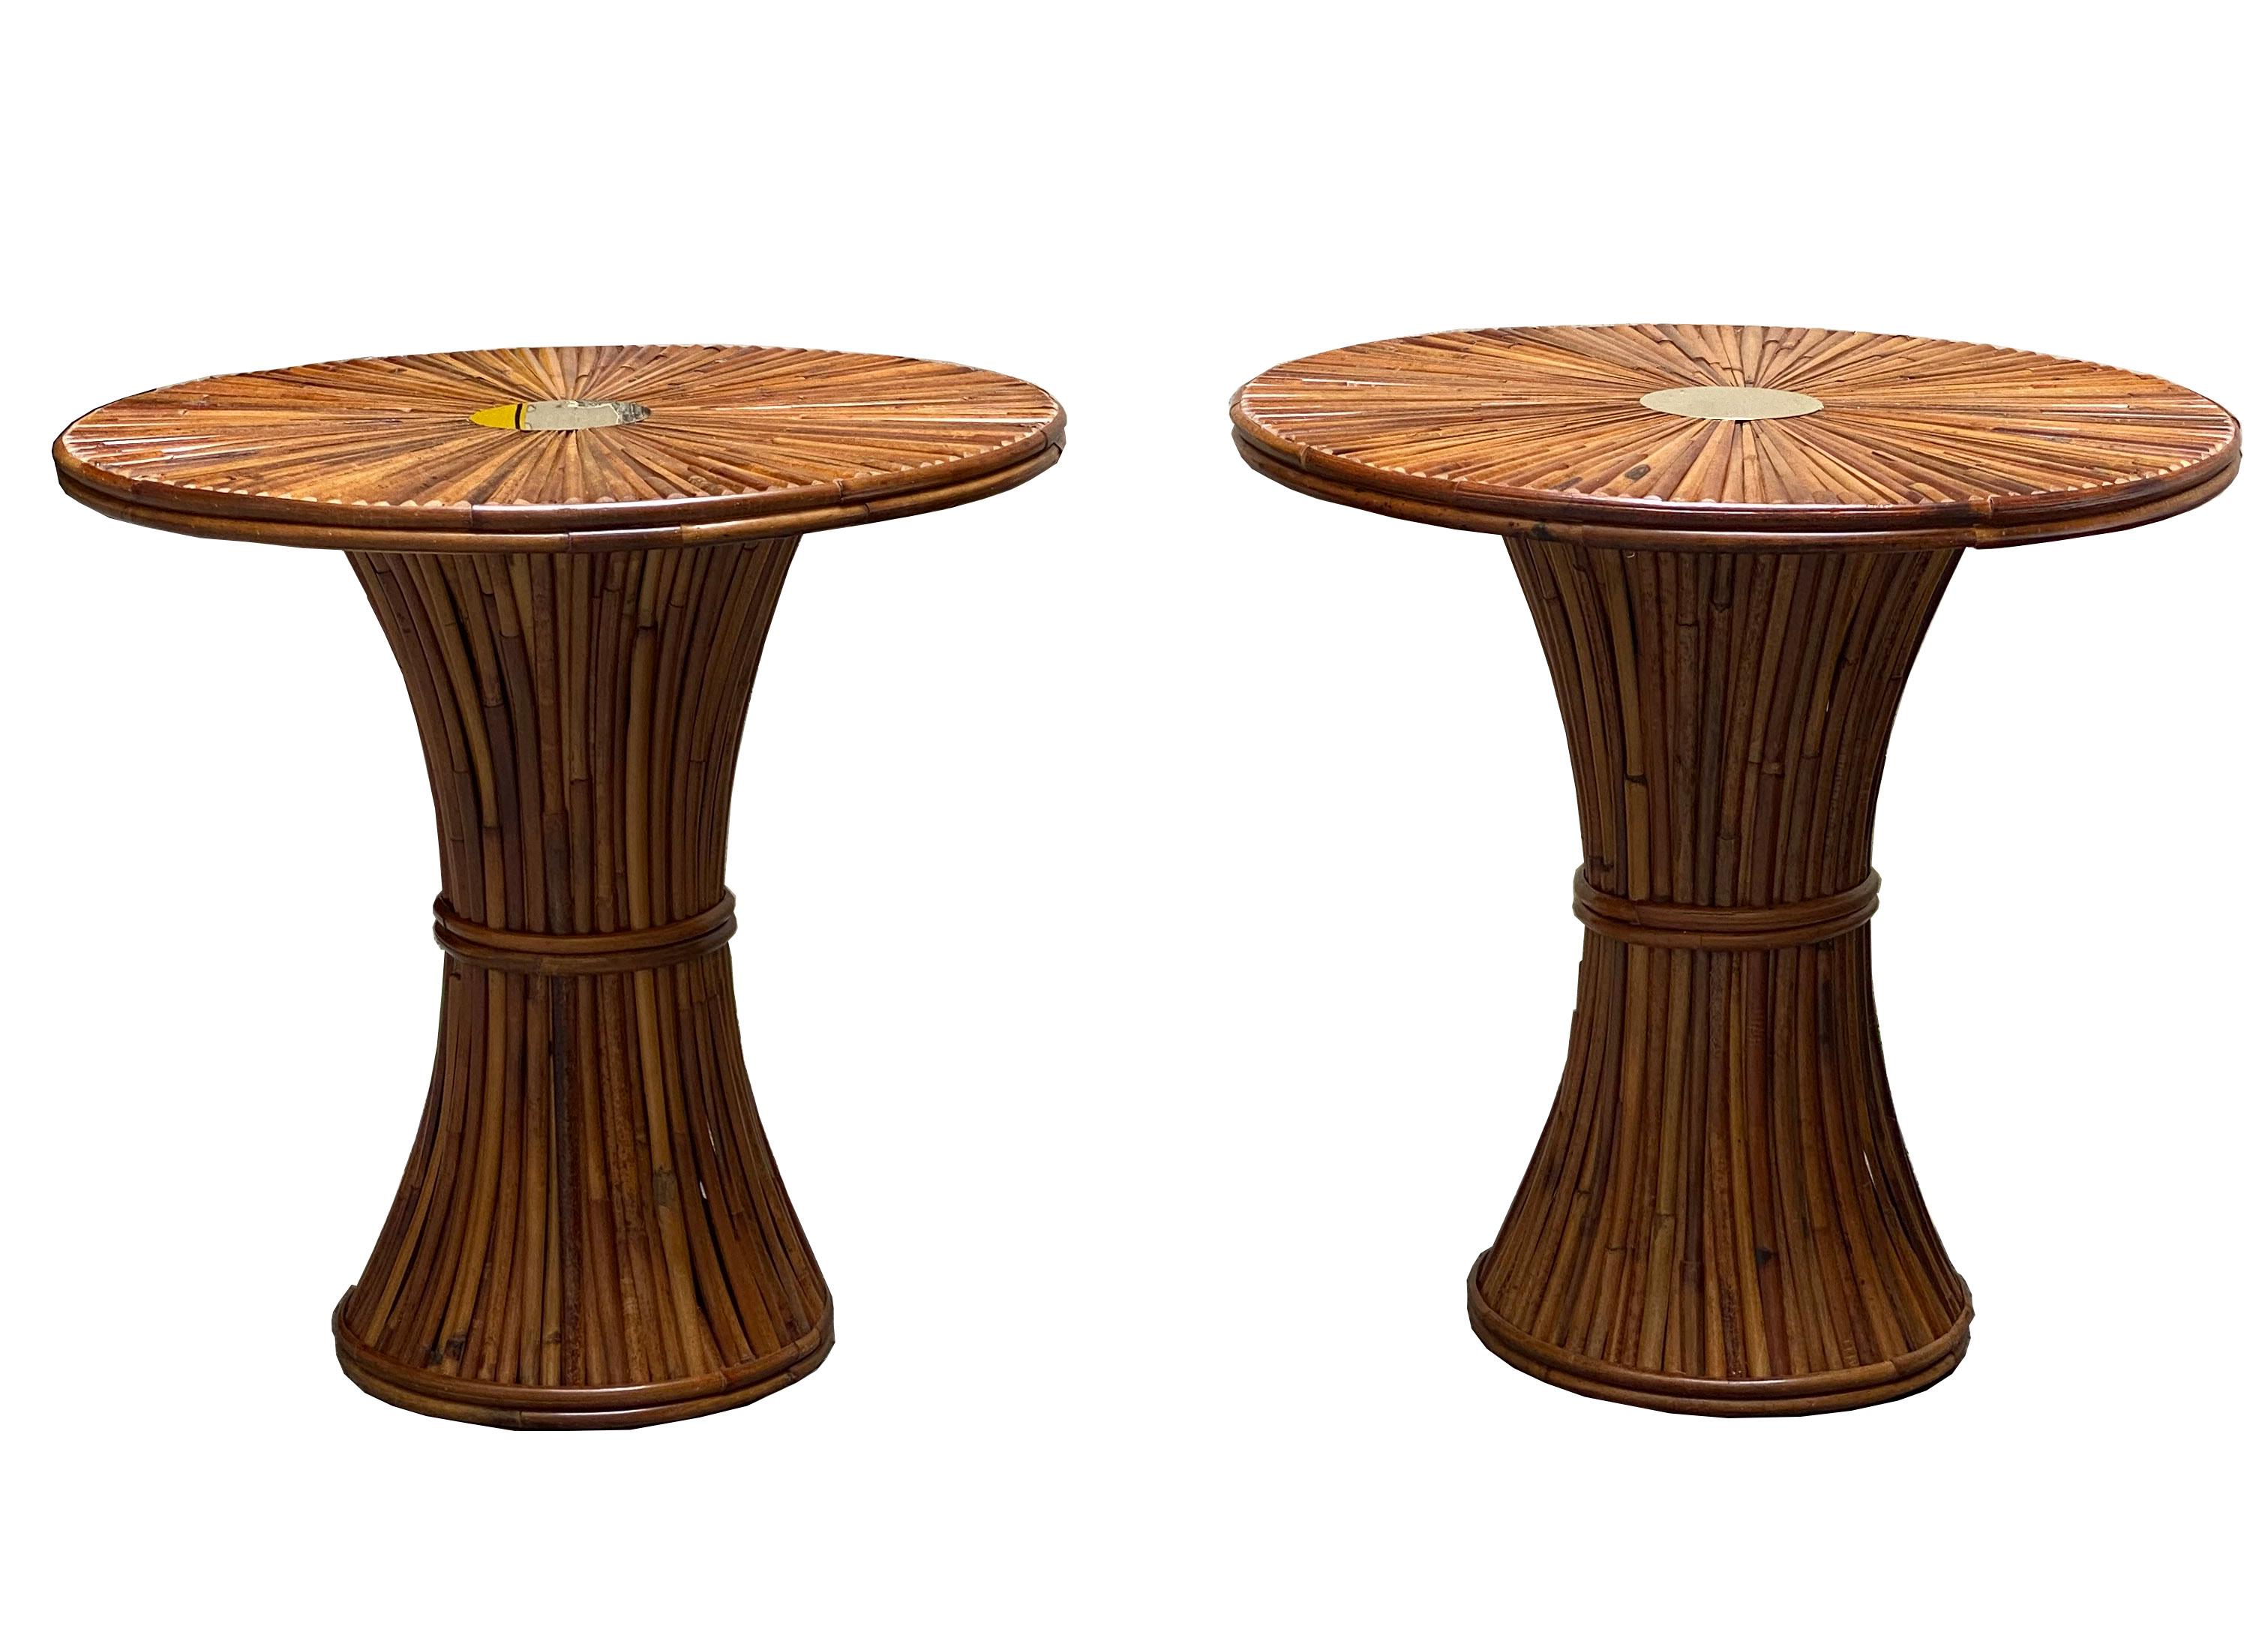 A round bamboo table with brass details, this table is also designed to function as a pair of consoles. Recent Italian manufacture. Artisanal work in the mood of Dal Vera, Vivai del Sud, Hollywood Regency.